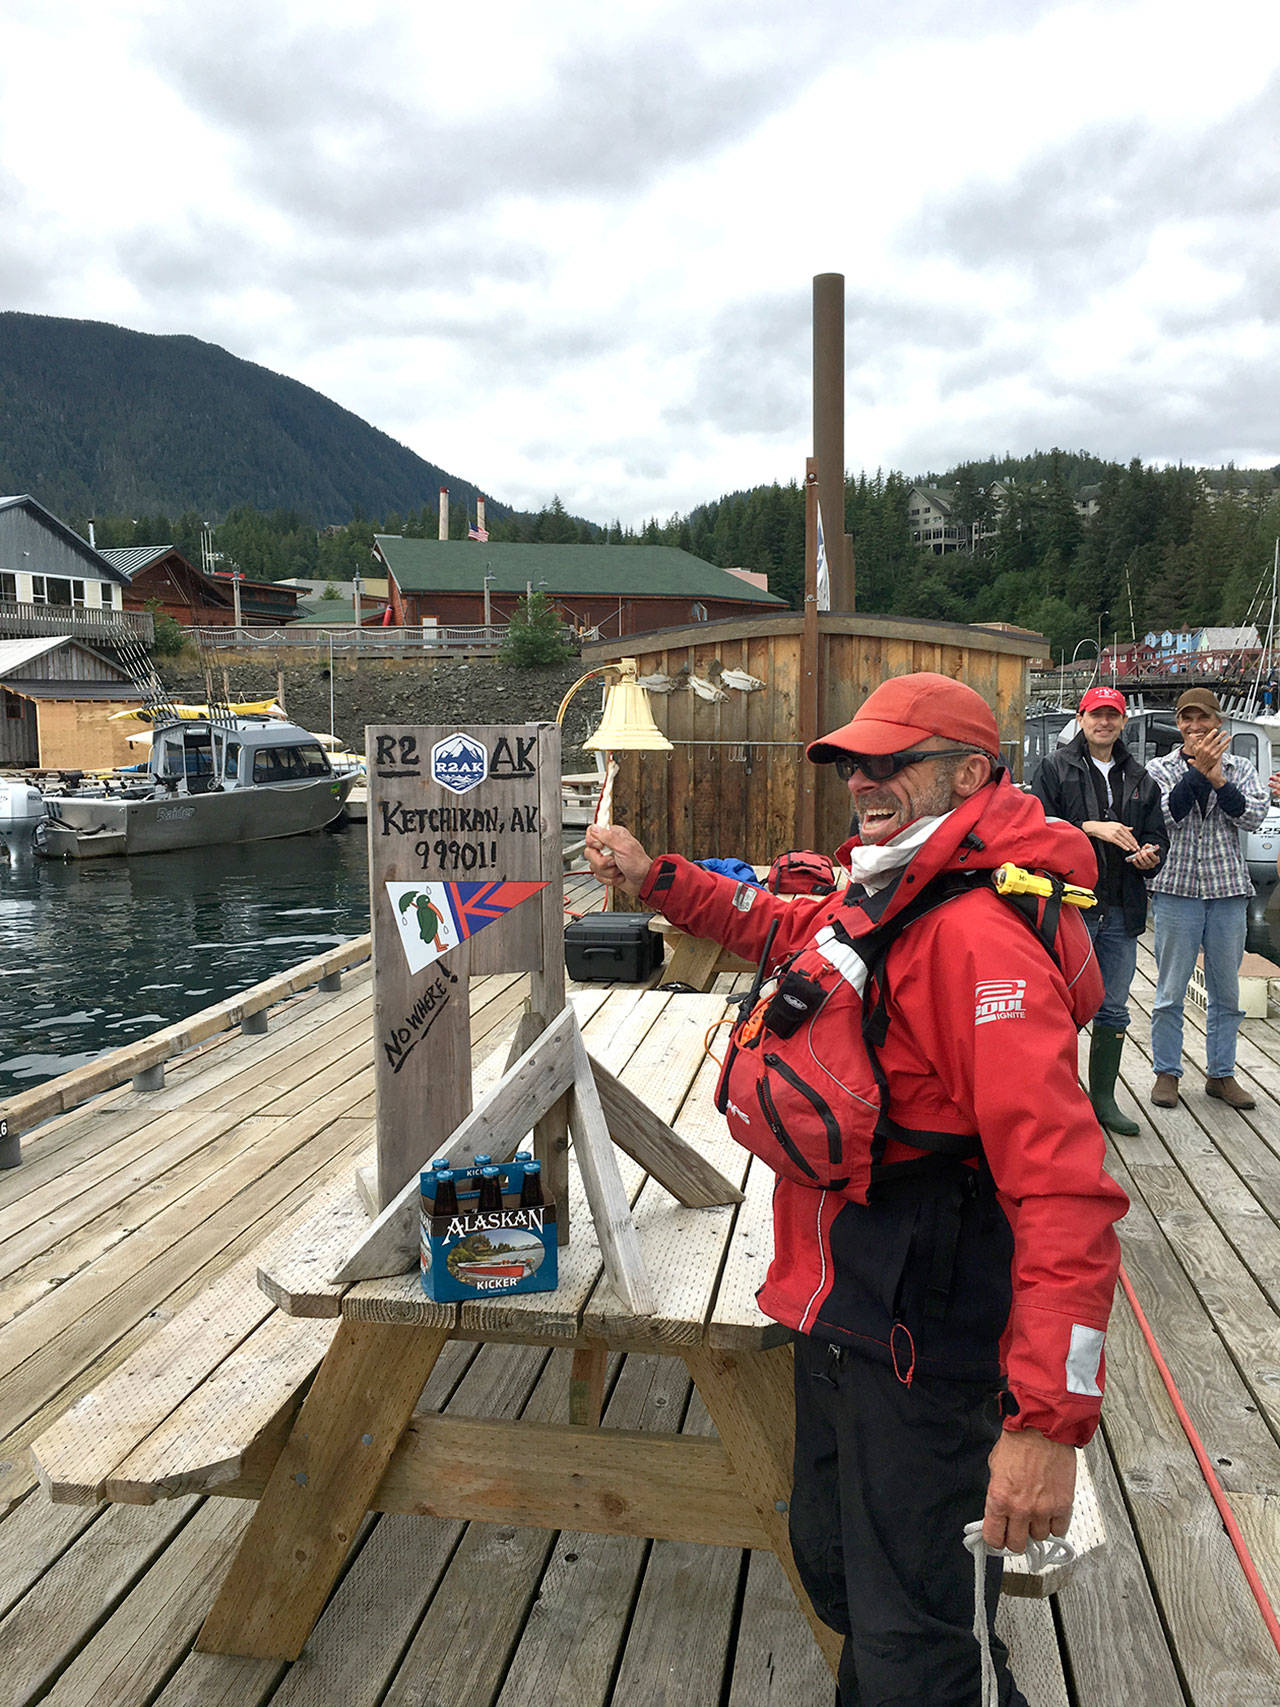 Thomas Nielsen of Team Sea Runners rings the finish bell in Ketchikan, Alaska, after completing the voyage from Port Townsend in 2016. (Race to Alaska)